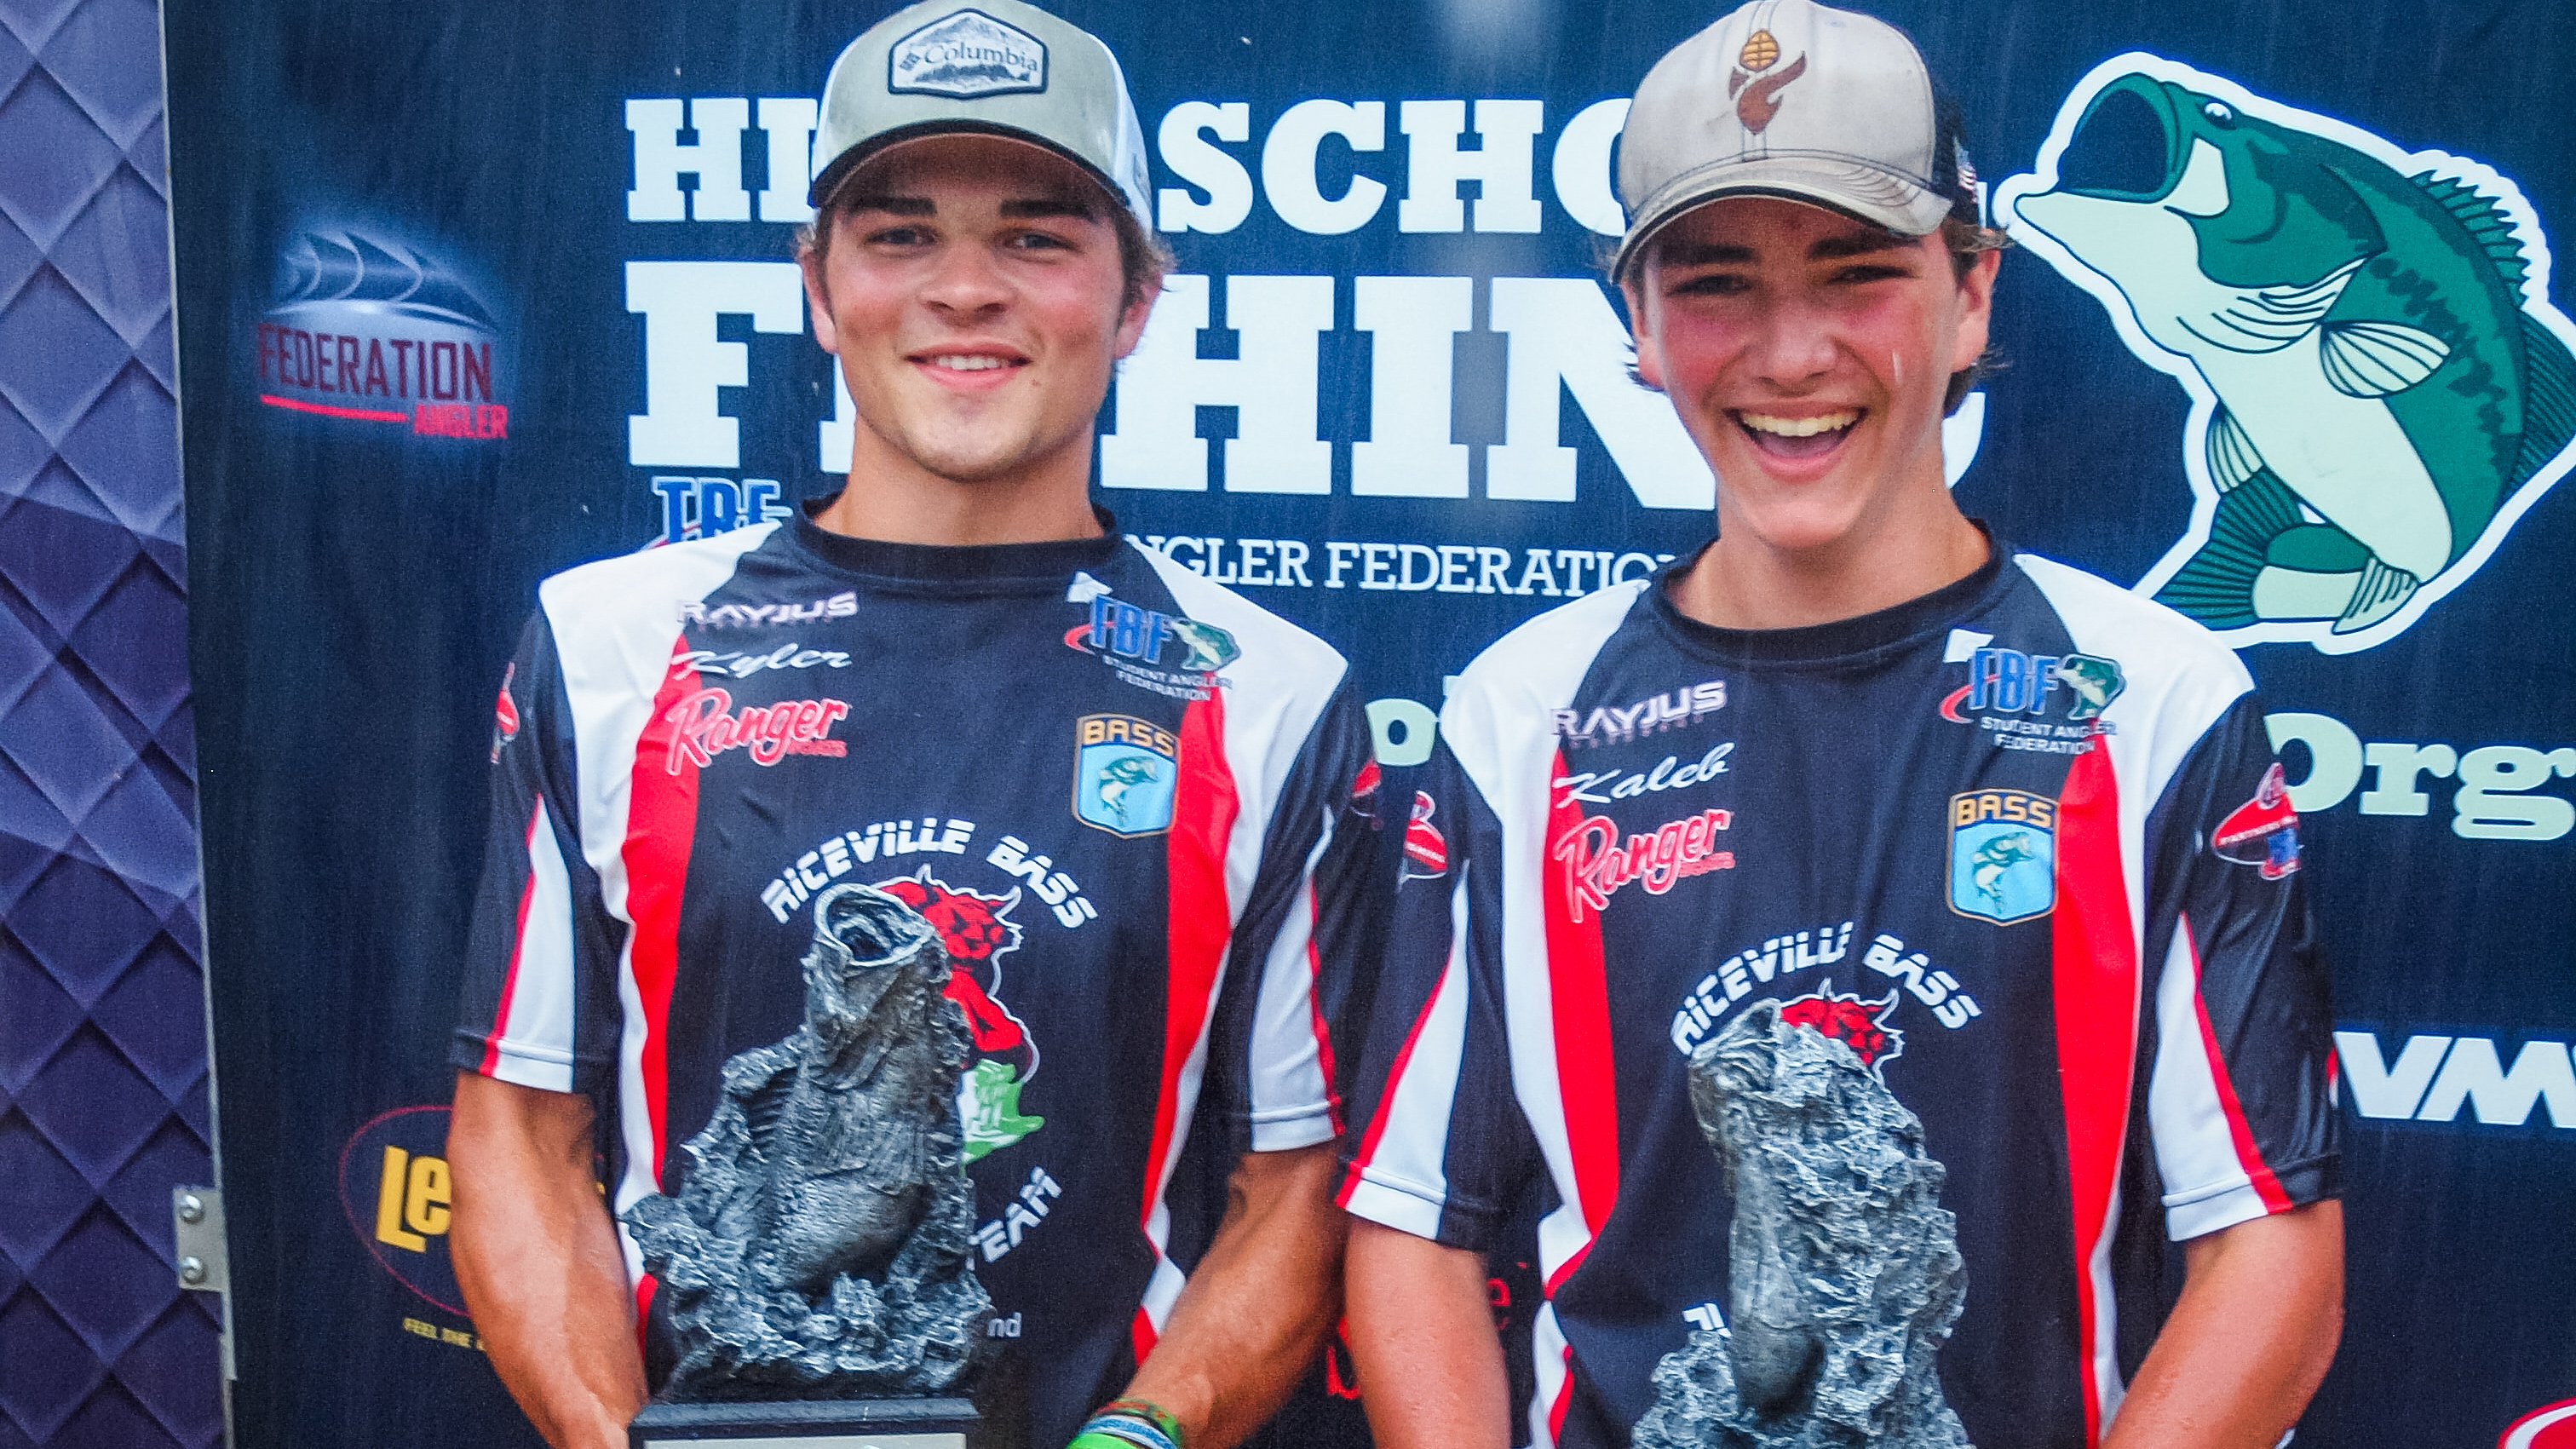 Losee, Tweite Close out High School Championship - Major League